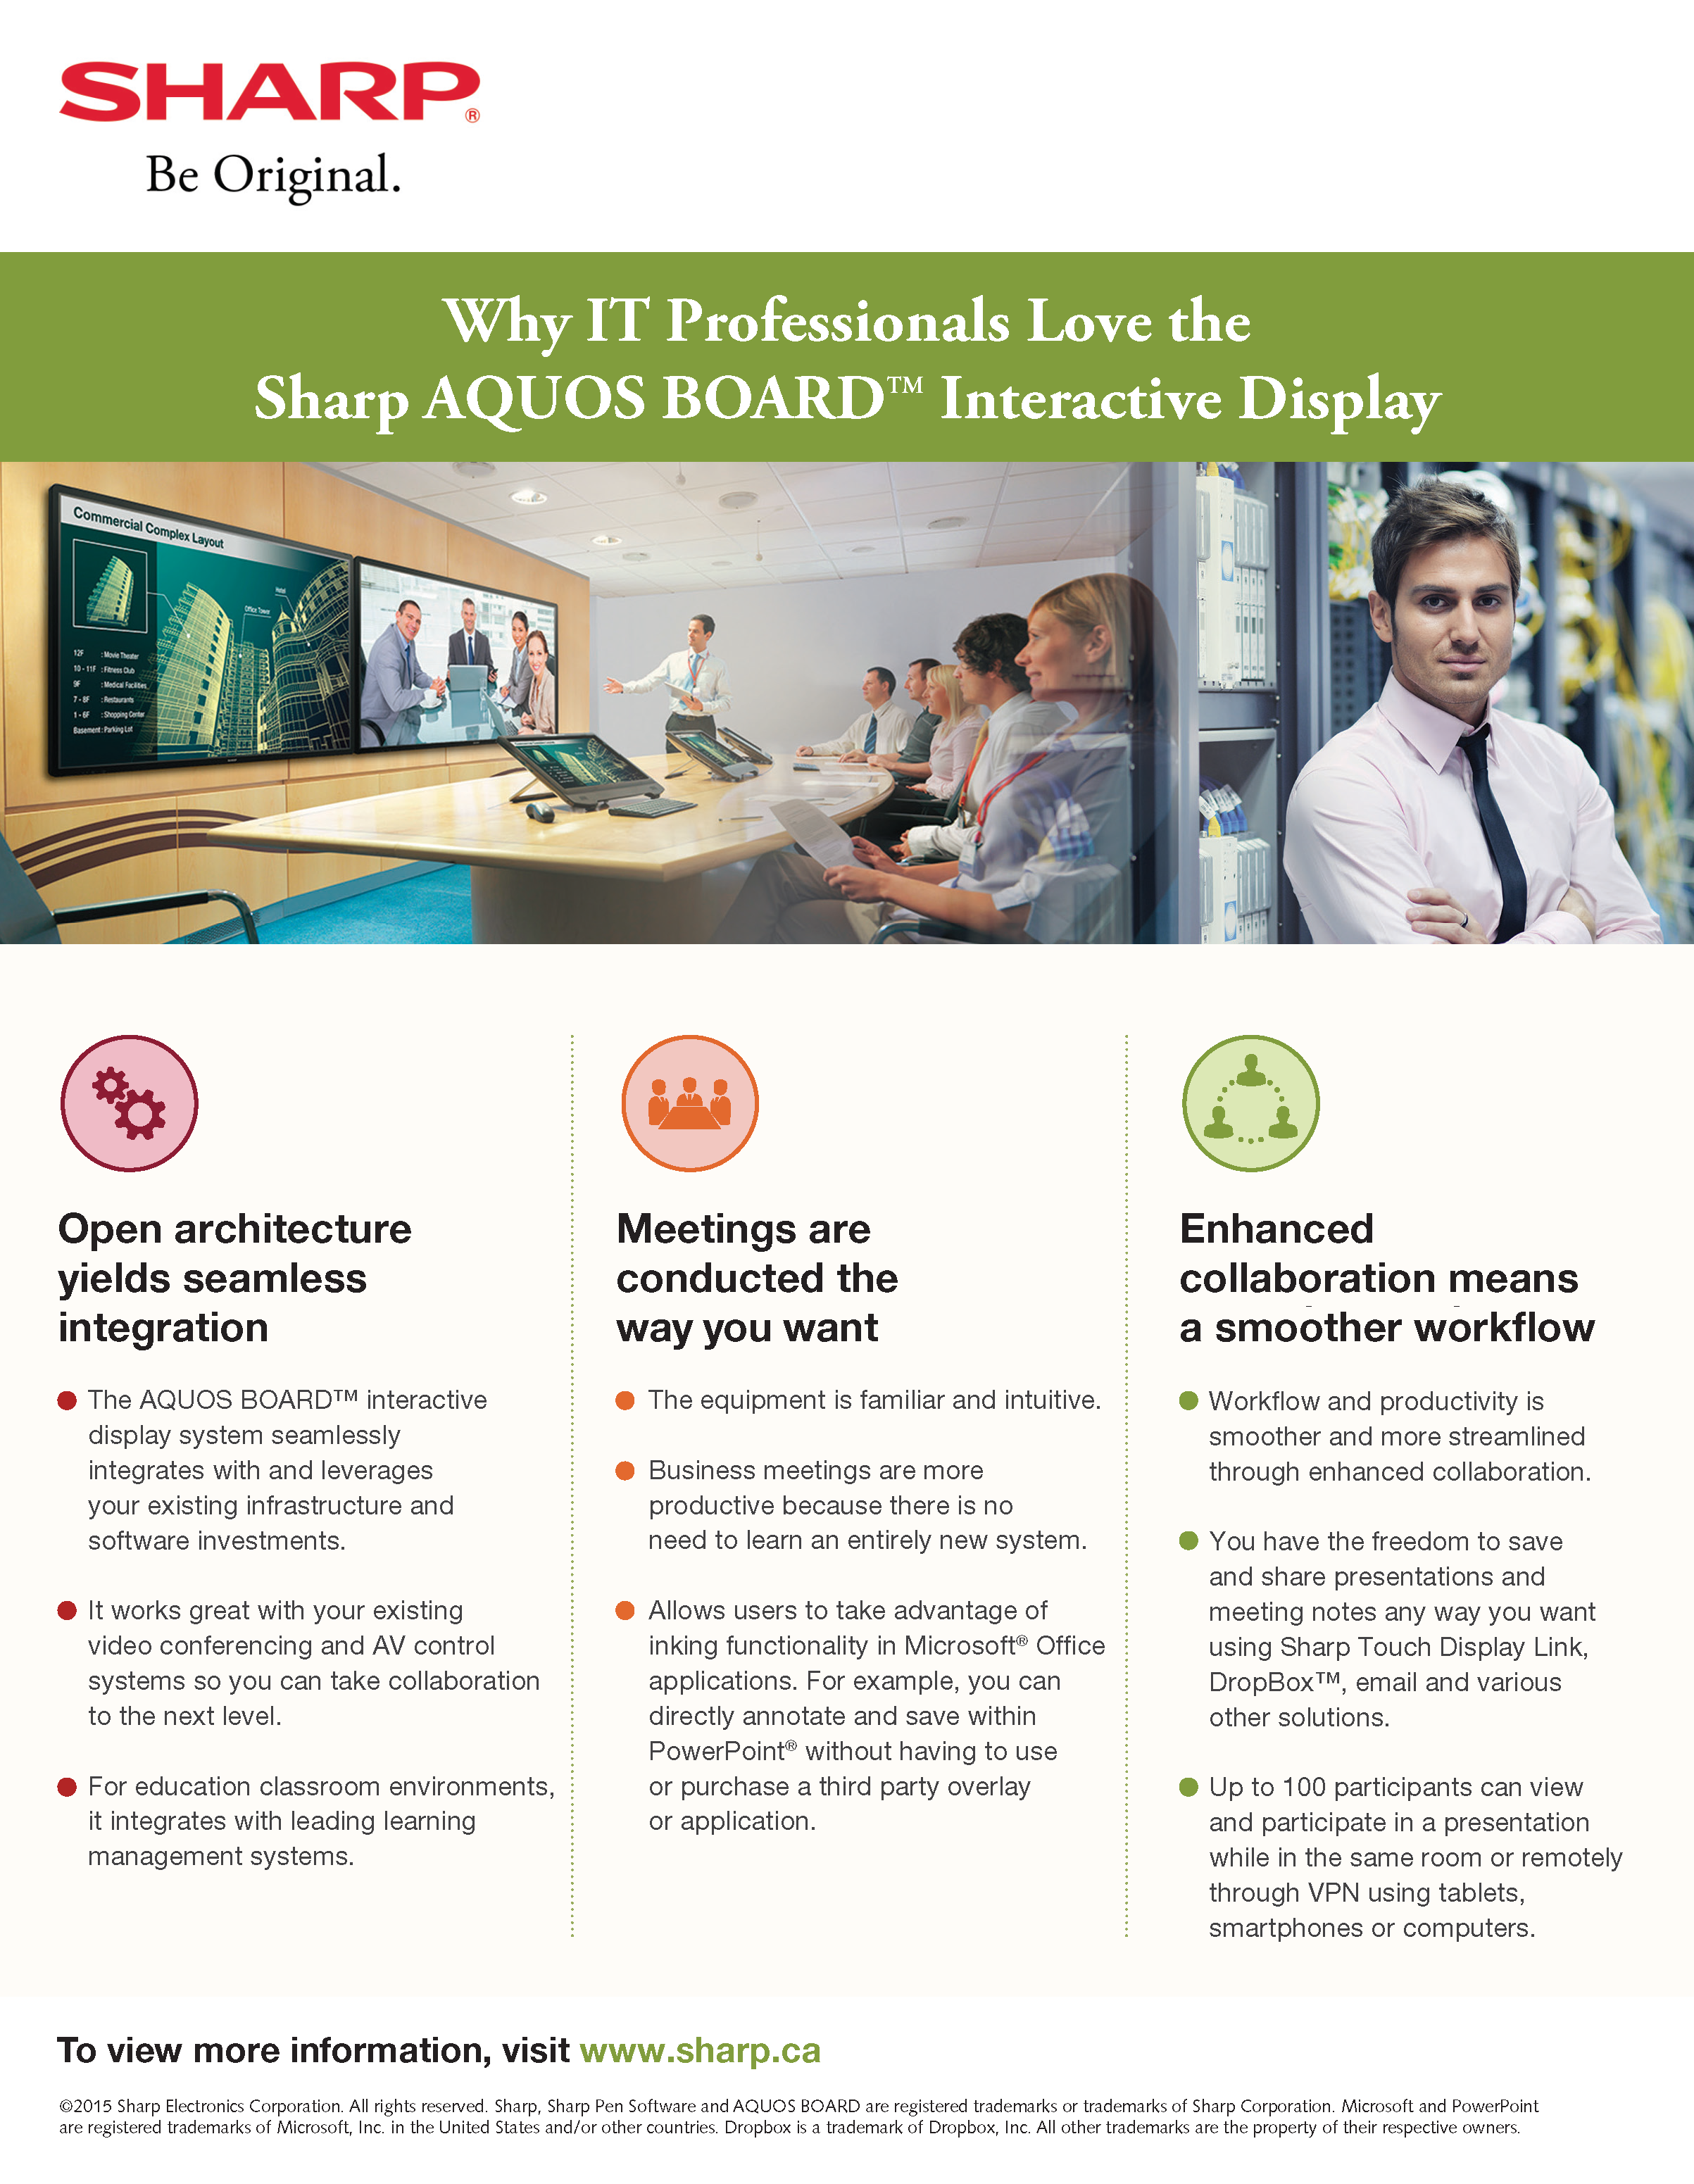 Why IT Professionals Love Sharp AQUOS BOARDS®